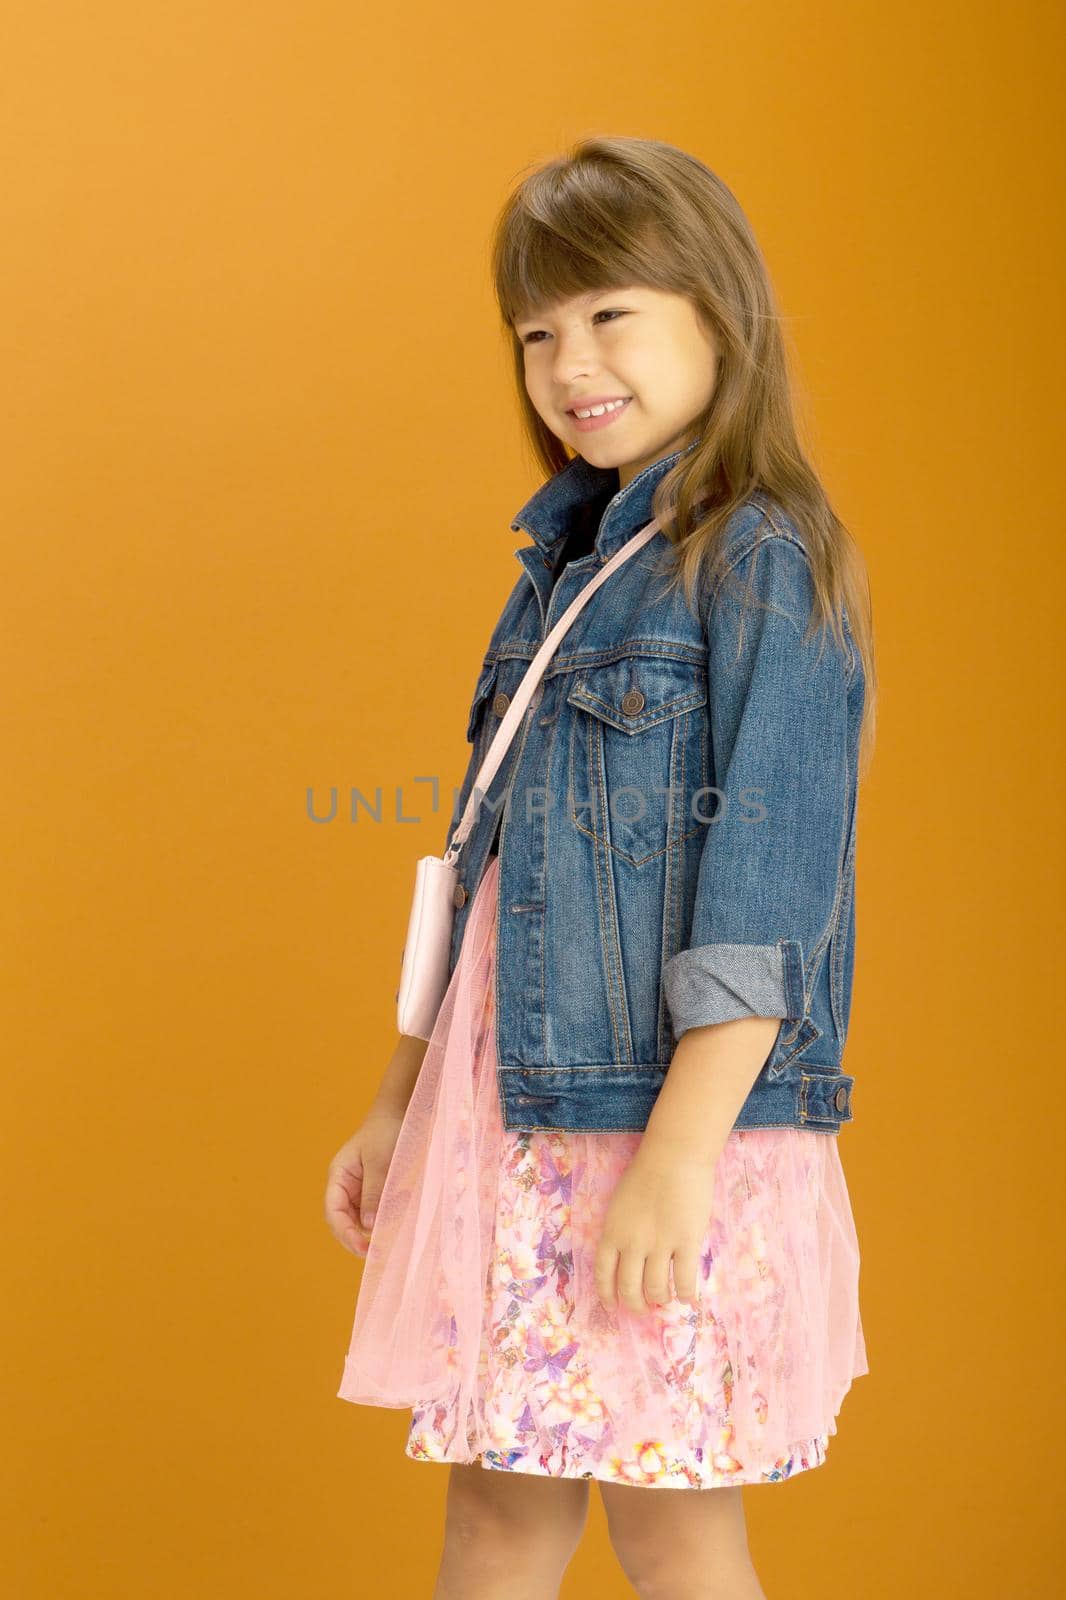 Beautiful girl in stylish outfit with shoulder bag. Smiling emotional preteen girl wearing denim jacket and pink fluffy skirt posing against ocher background with crossbody clutch decorated with heart